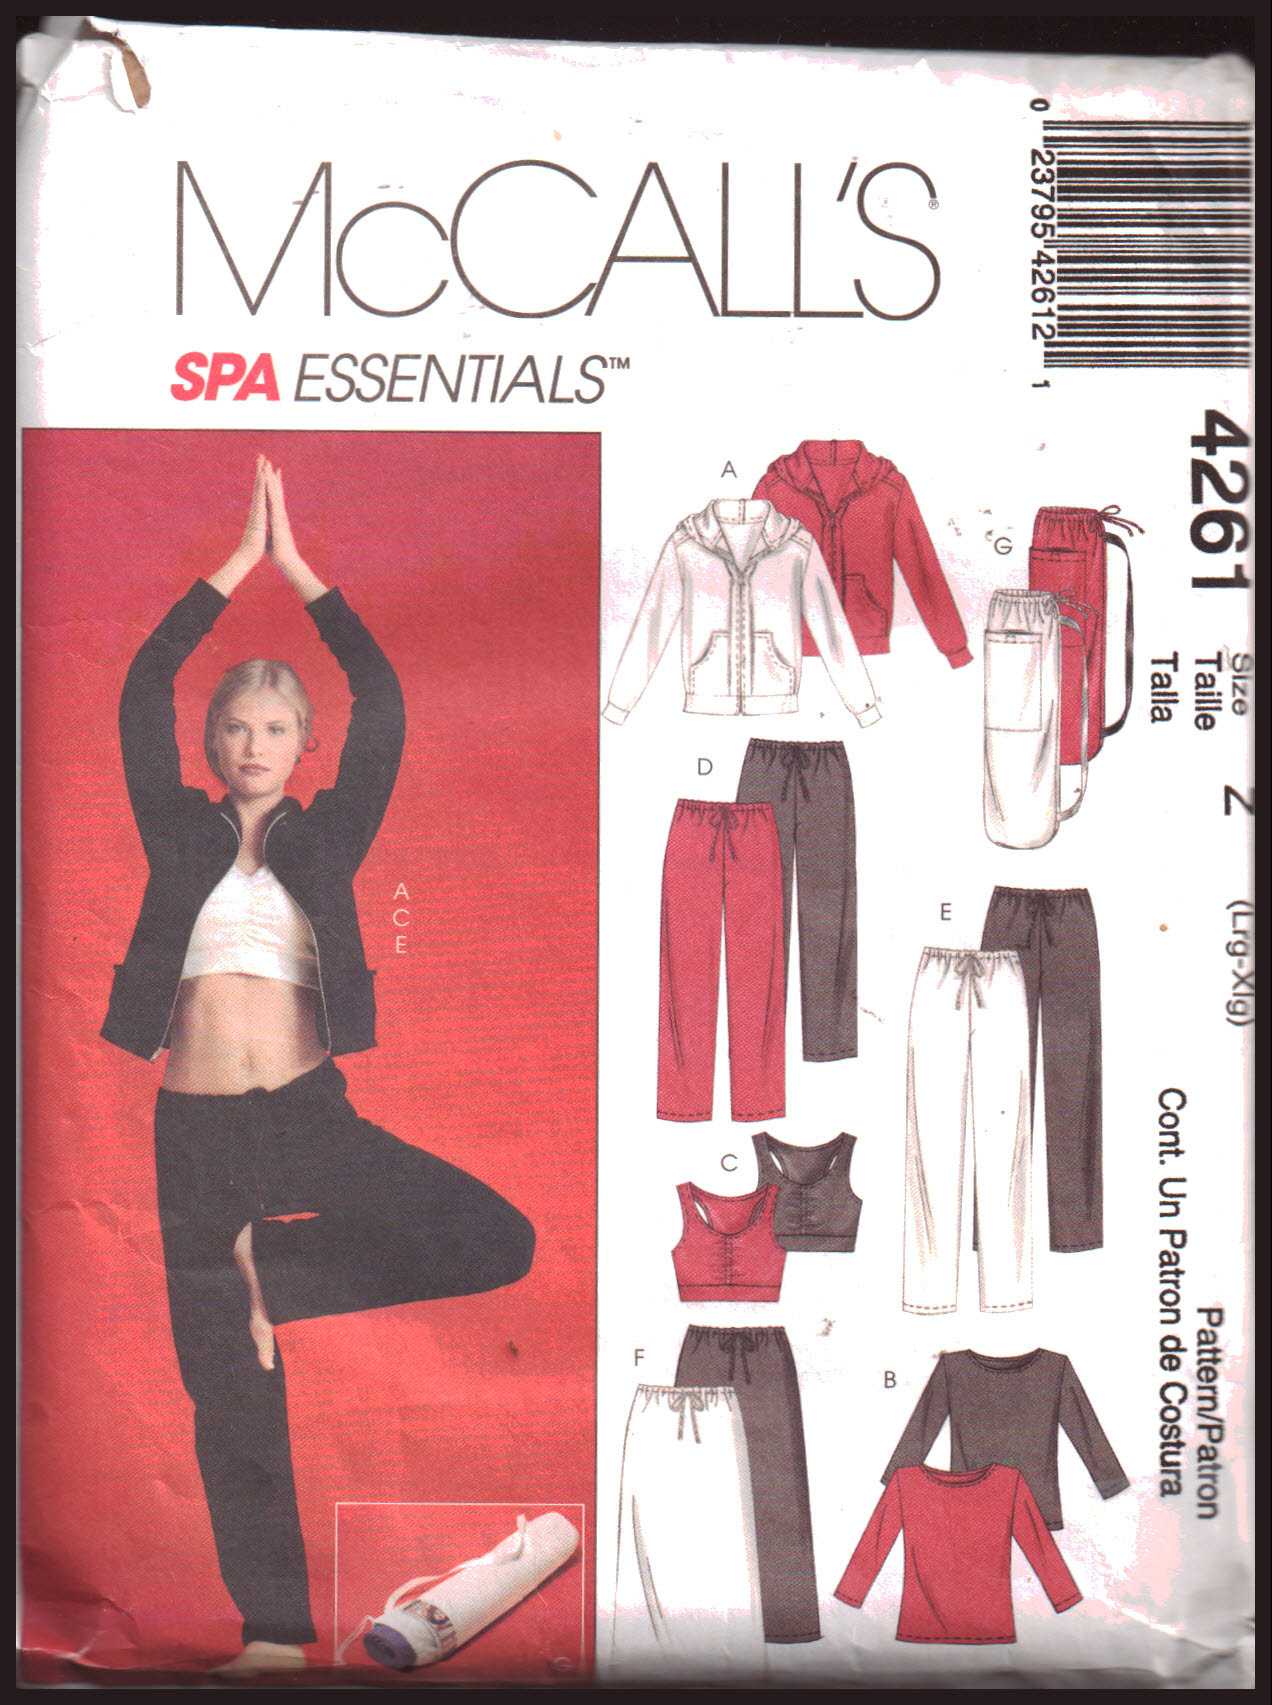 McCall's 4261 Tracksuit - Jacket, Tops, Pants, Skirt, Bag Size: Y XS